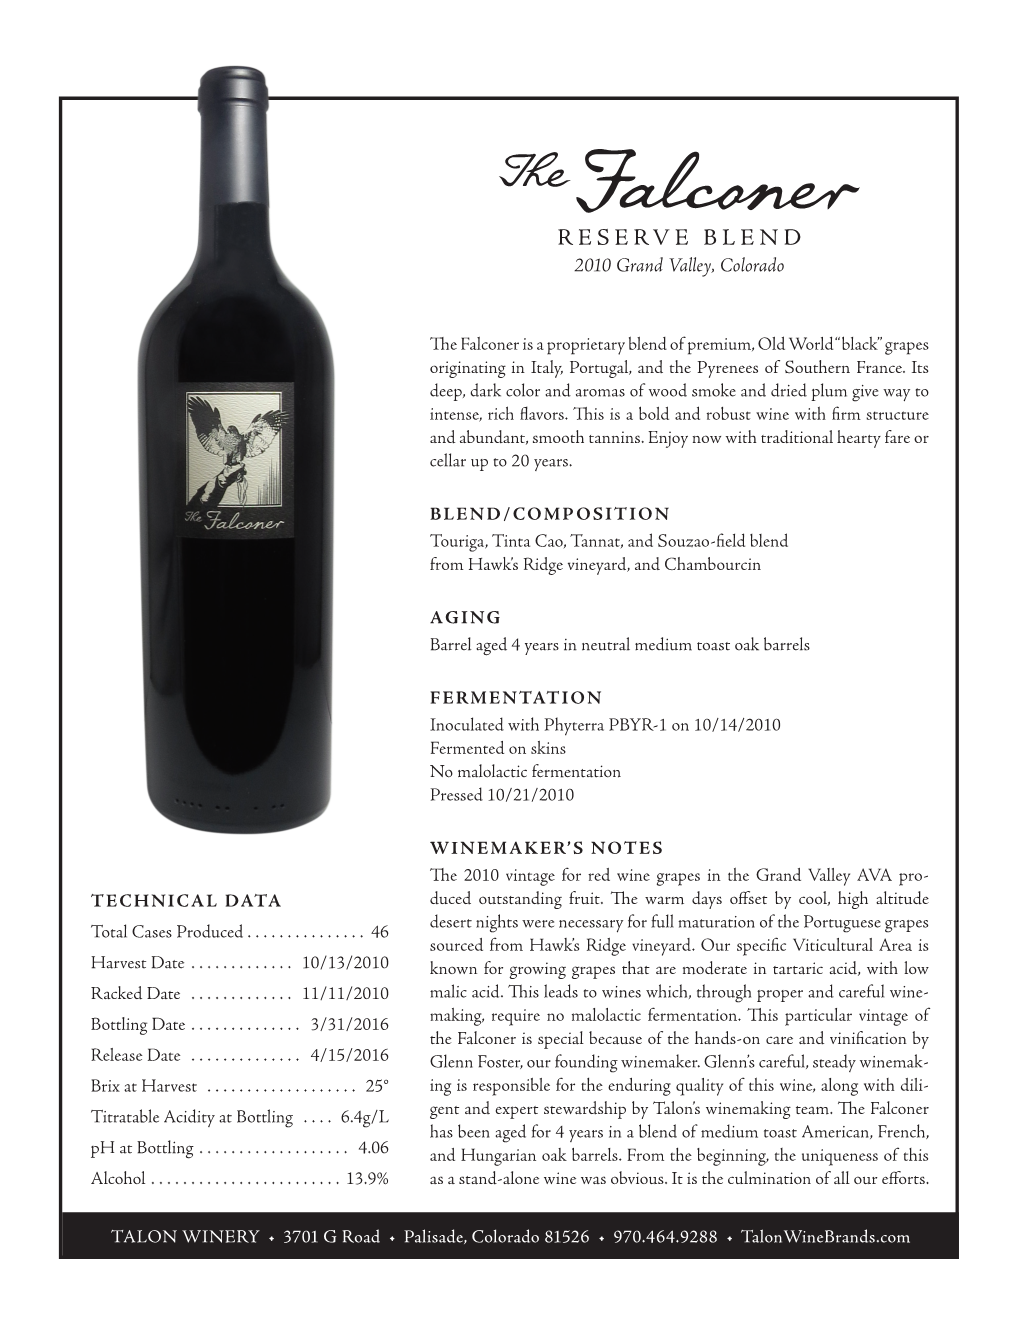 The Falconer Is a Proprietary Blend of Premium, Old World “Black” Grapes Originating in Italy, Portugal, and the Pyrenees of Southern France